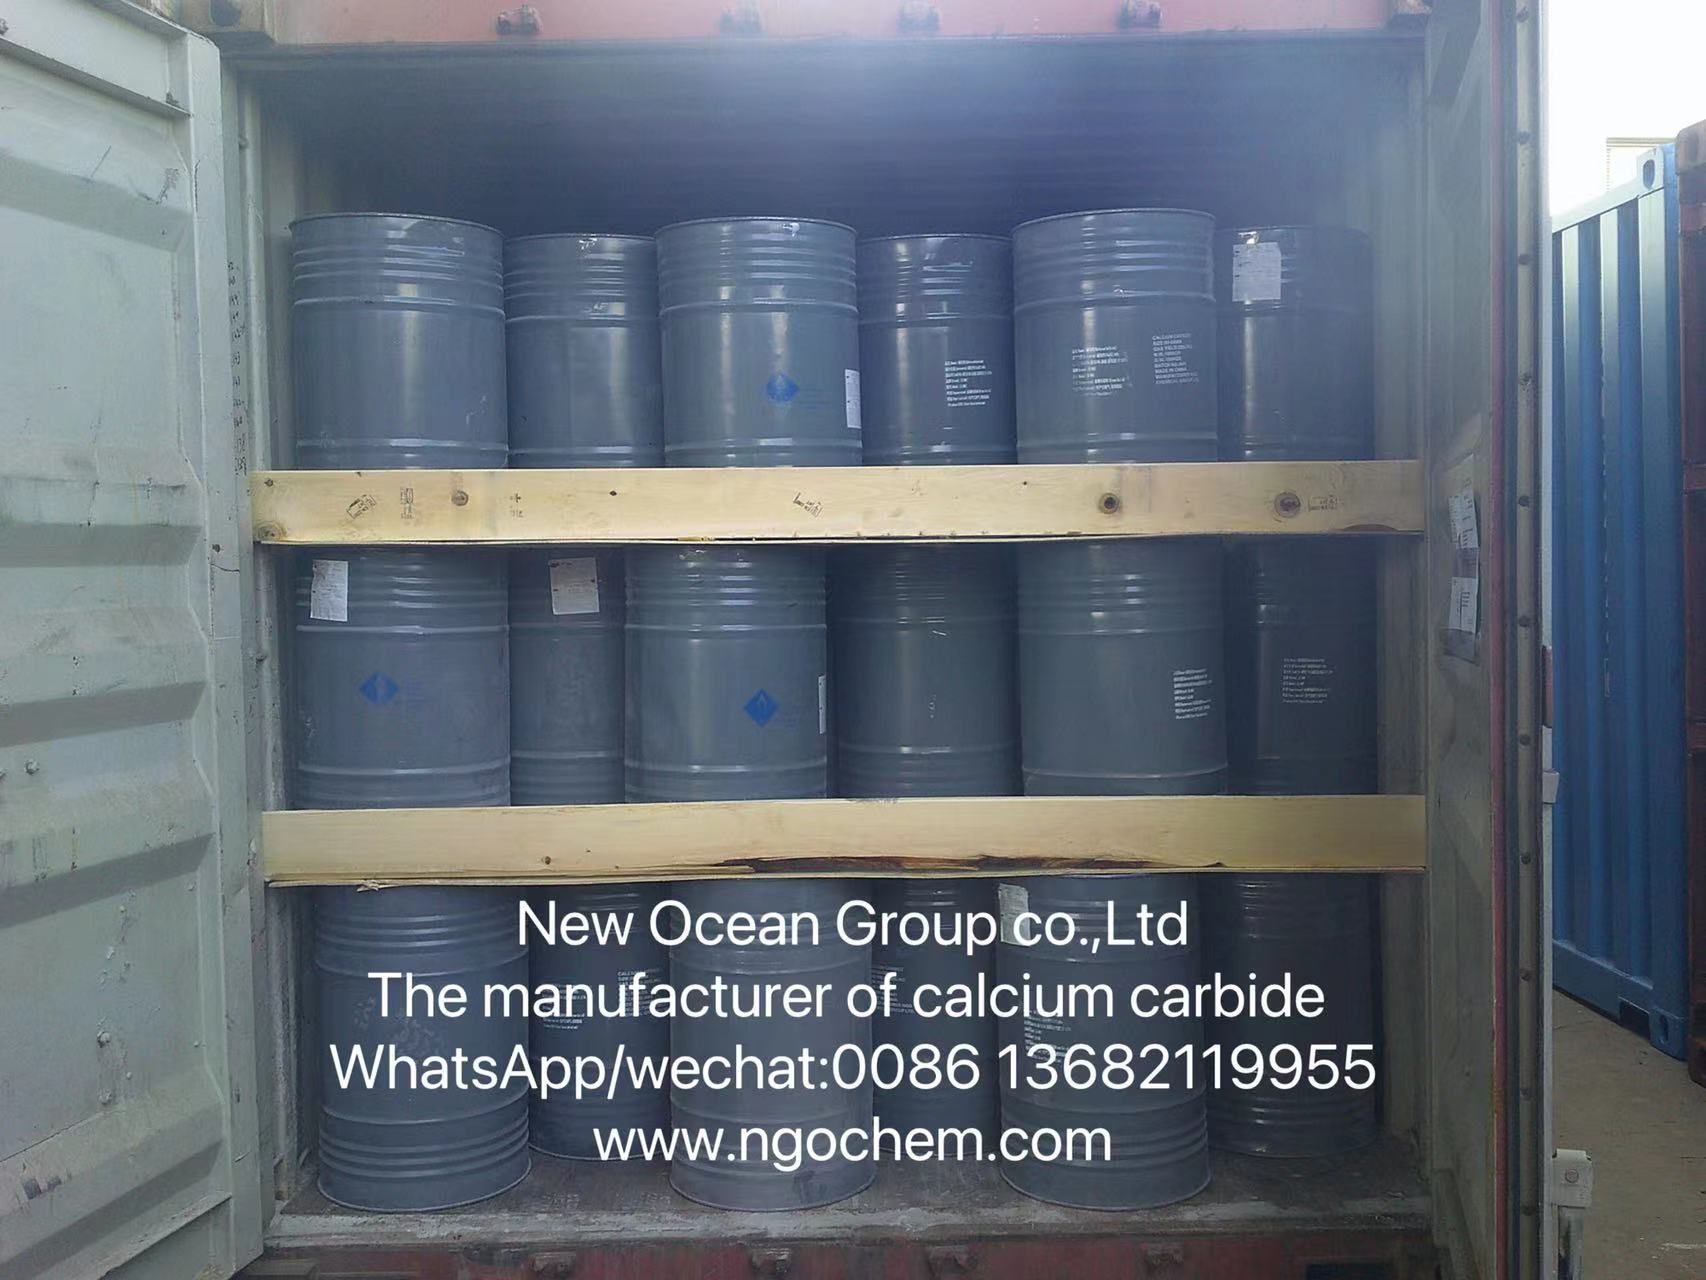 On November 11, the factory price of northwest calcium carbide was temporarily stable